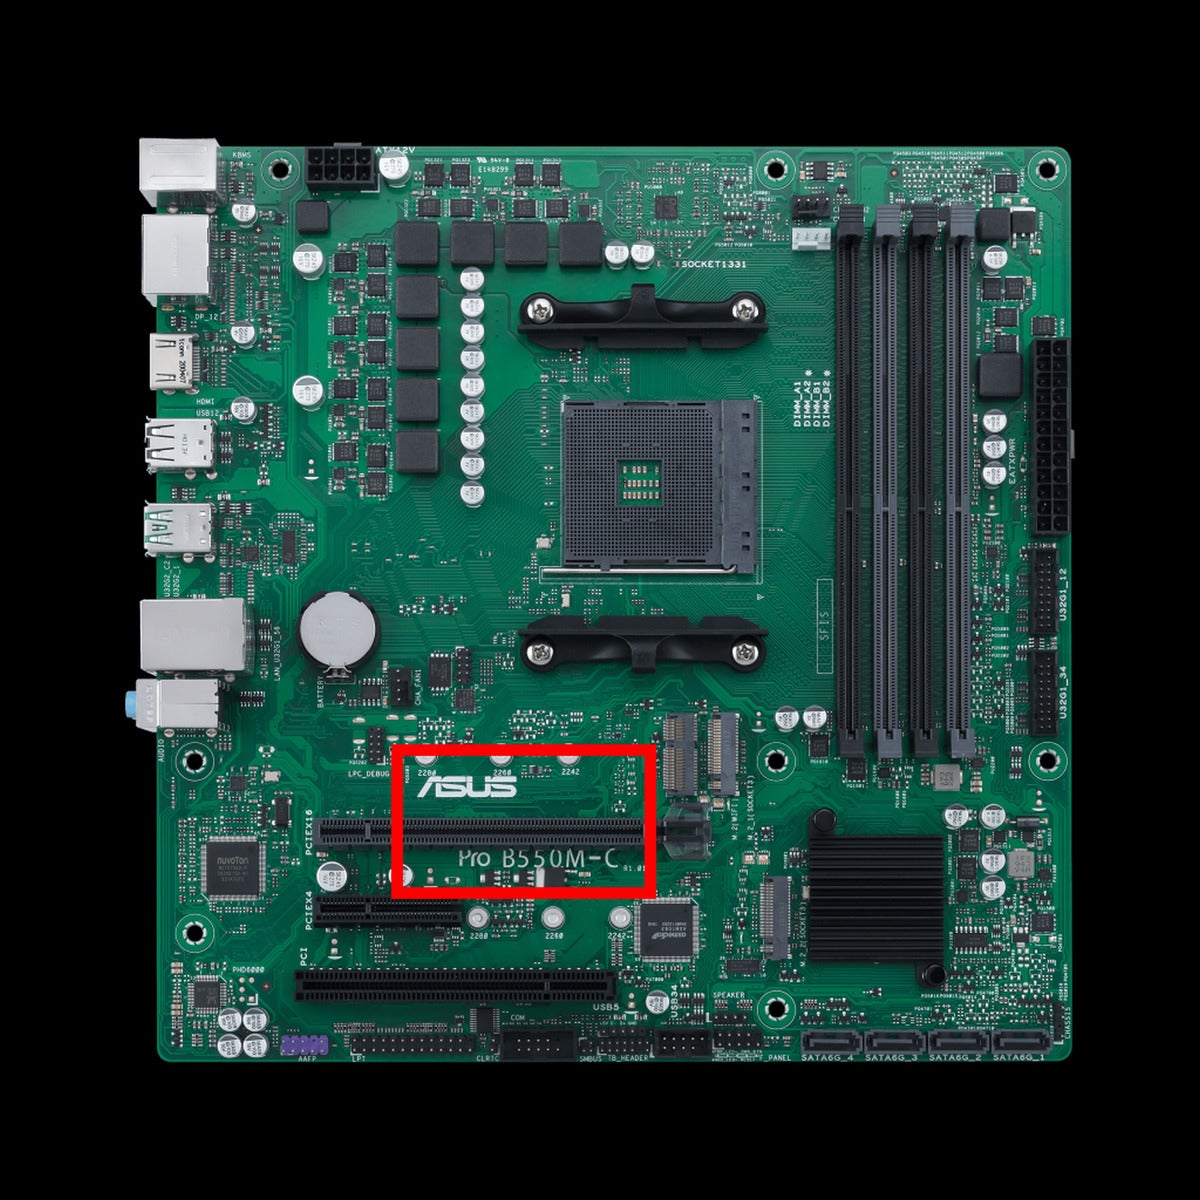 vat Premier cabine How to check what motherboard you have | PCWorld